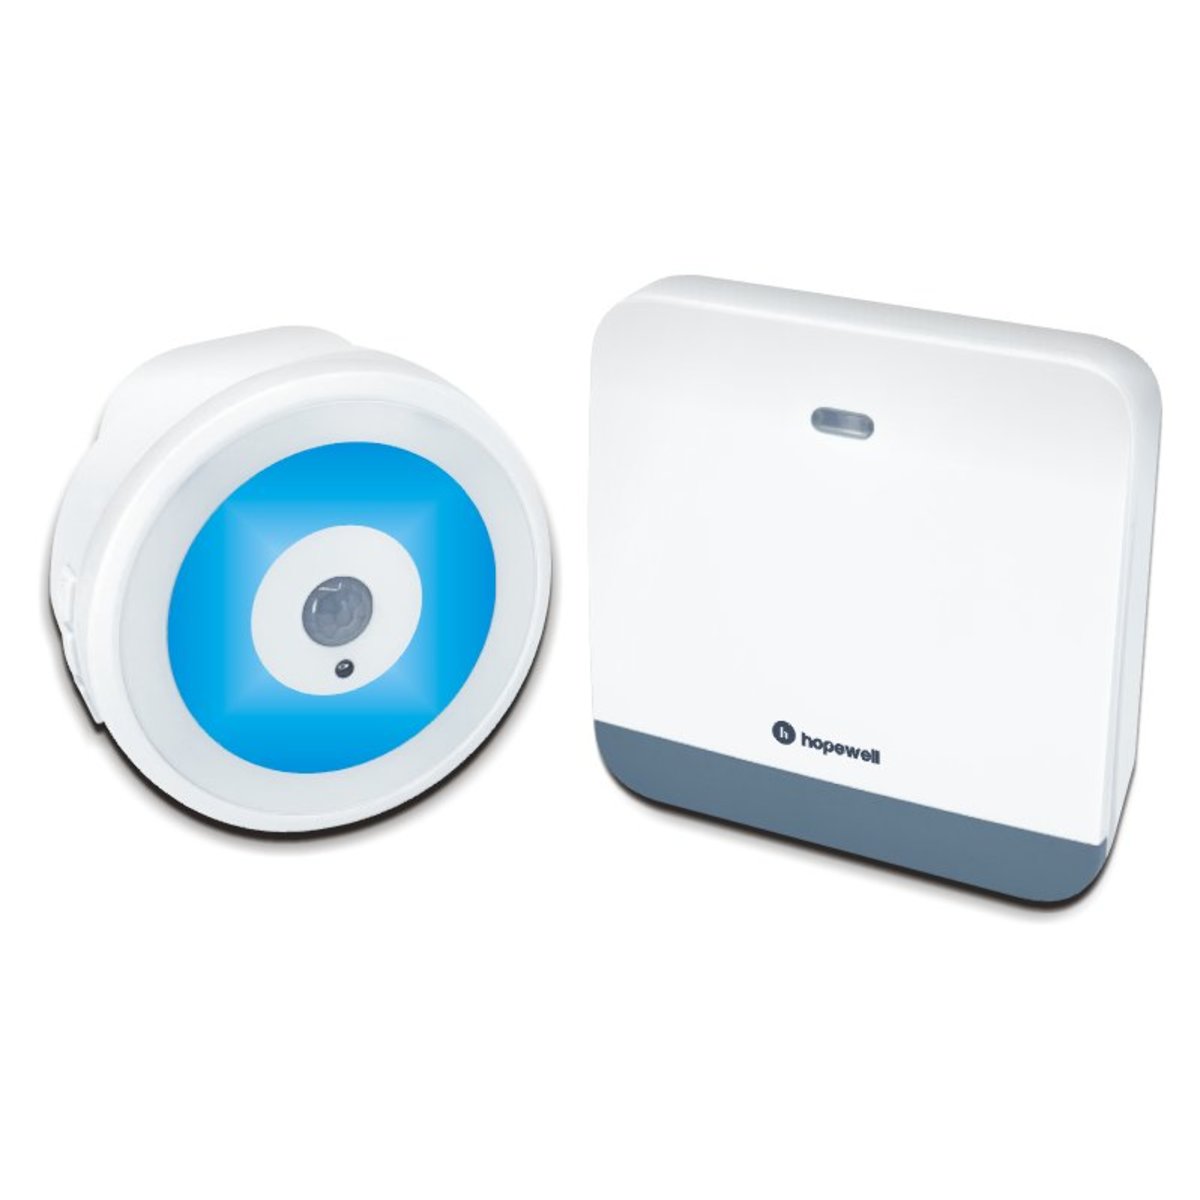 hopewell - DN-511 200 meter strong battery-free wireless doorbell (plug-in, with sensor night light)